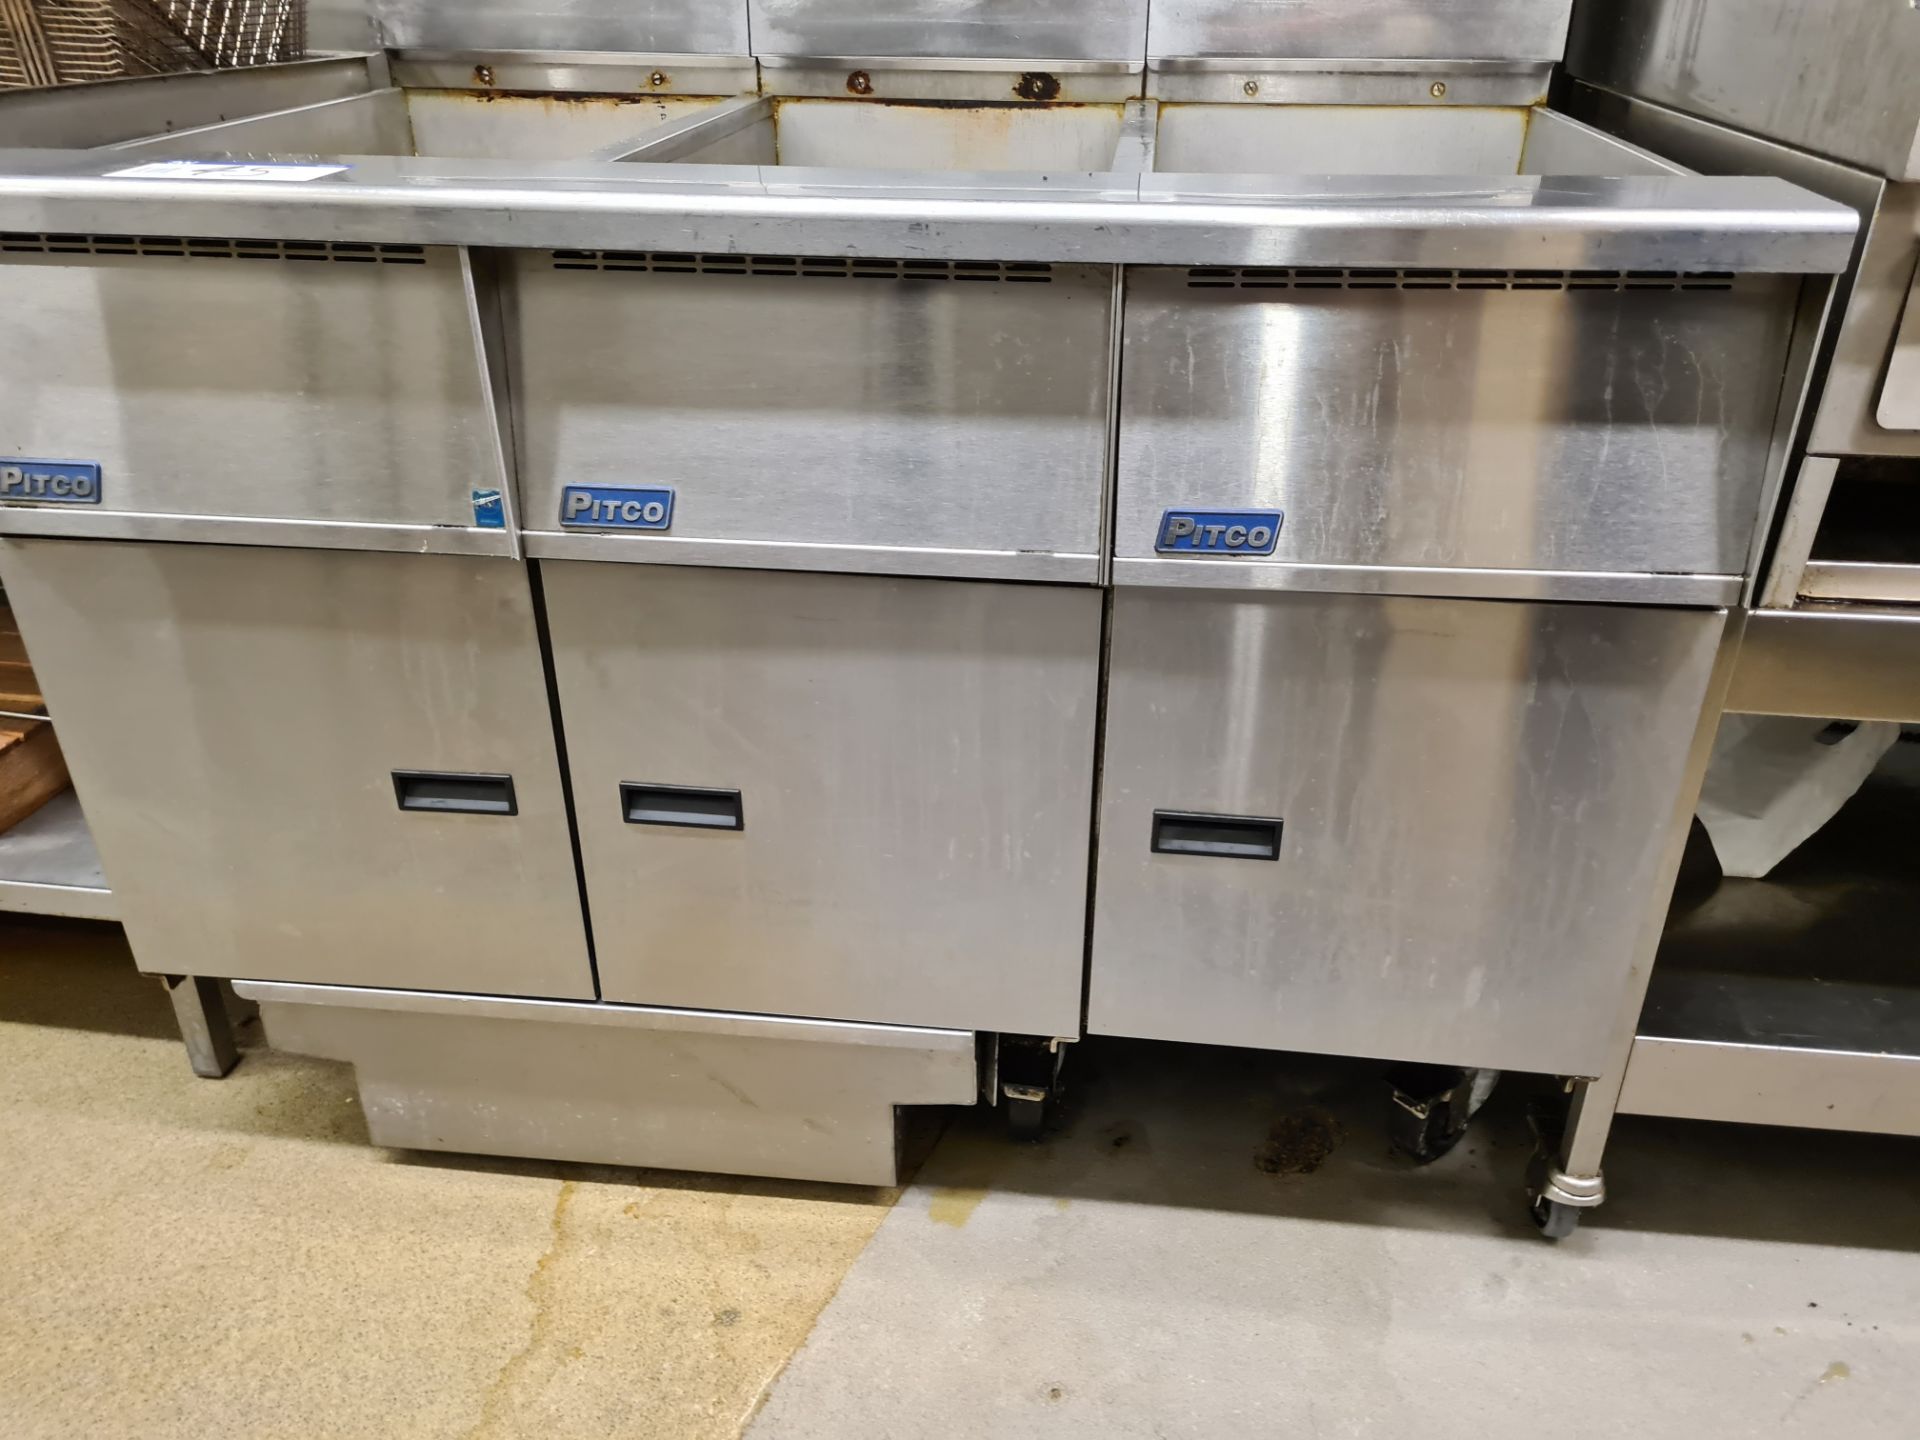 PITCO Stainless Steel Triple Mobile Deep Fat Fryer c/w Six Frying Baskets, Approx. 1.2m (L) x 0. - Image 4 of 7